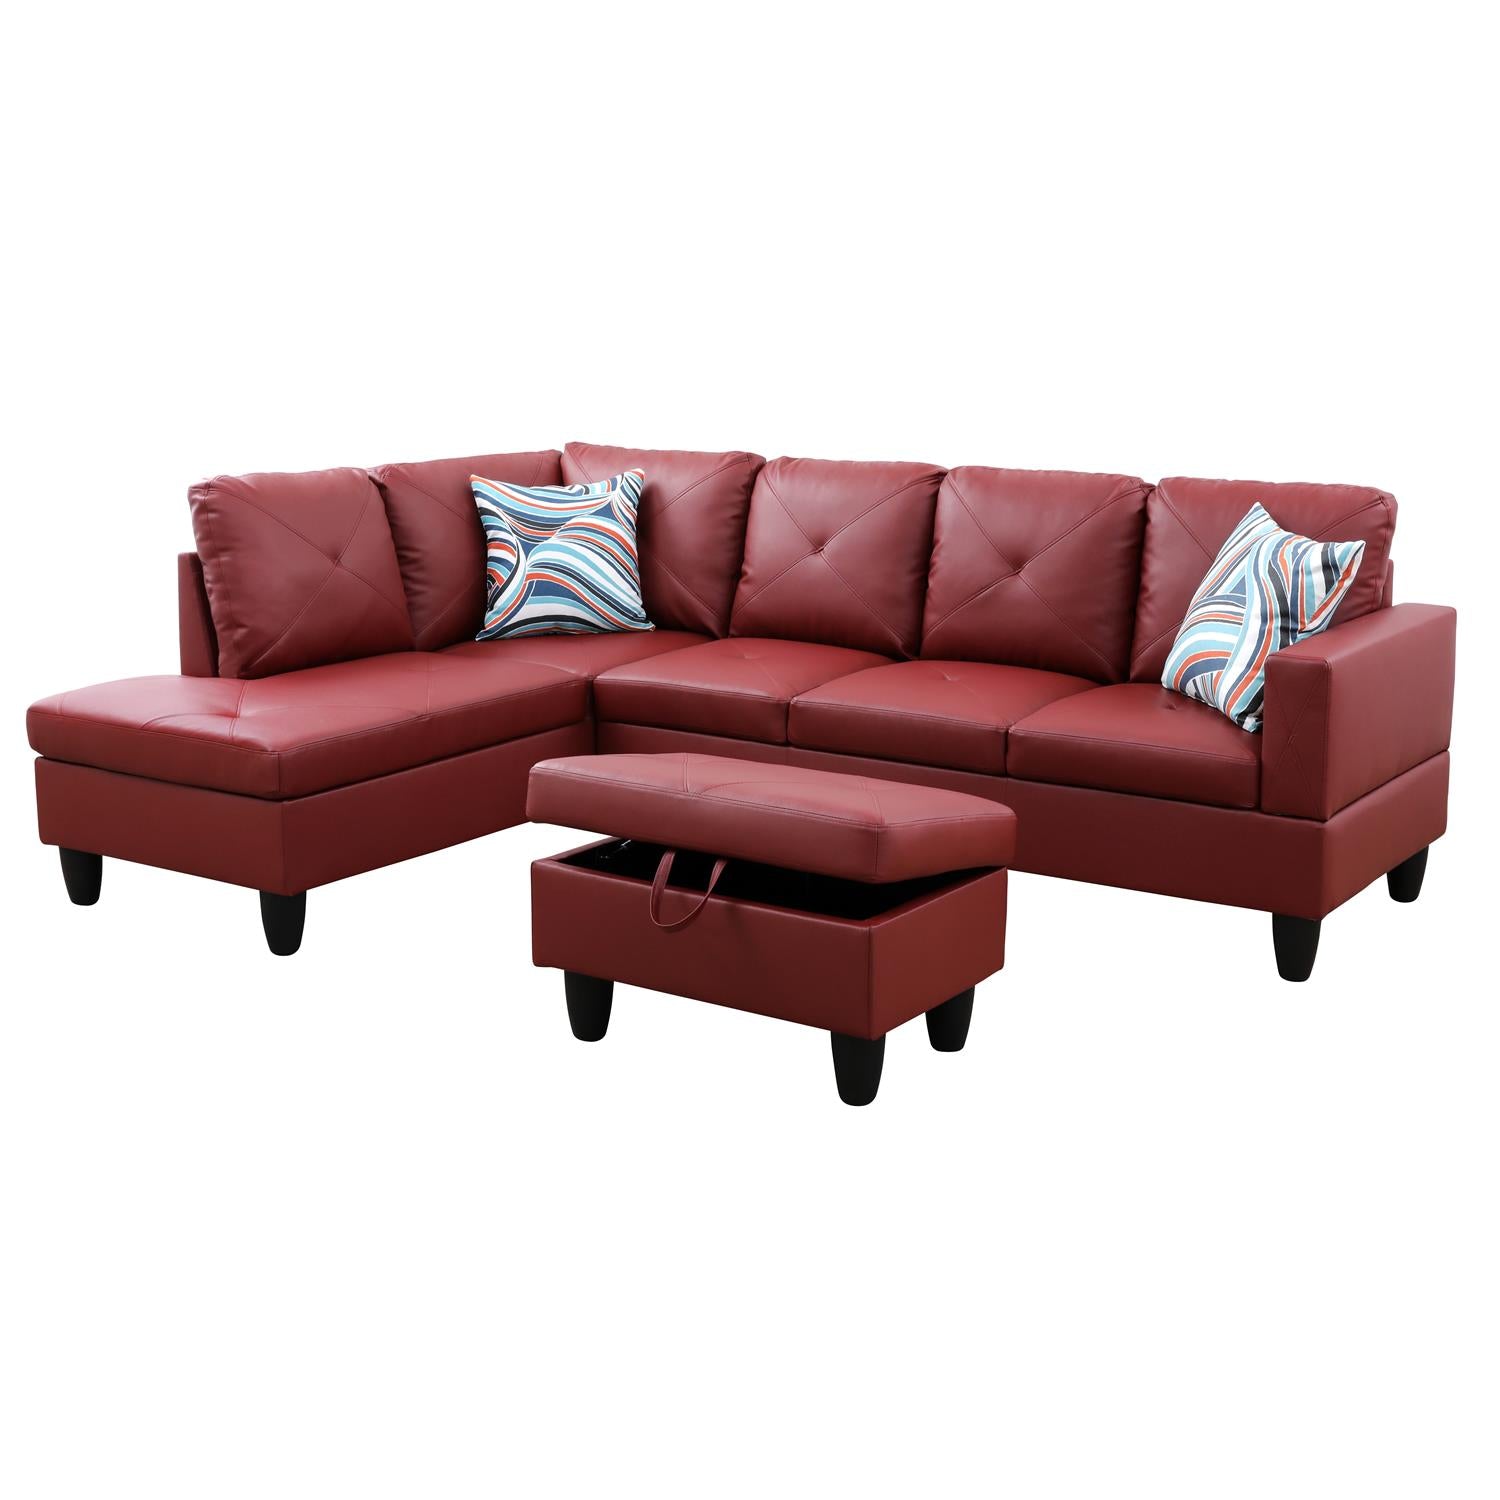 Ainehome Red L-Shaped Faux Leather Sofa Set